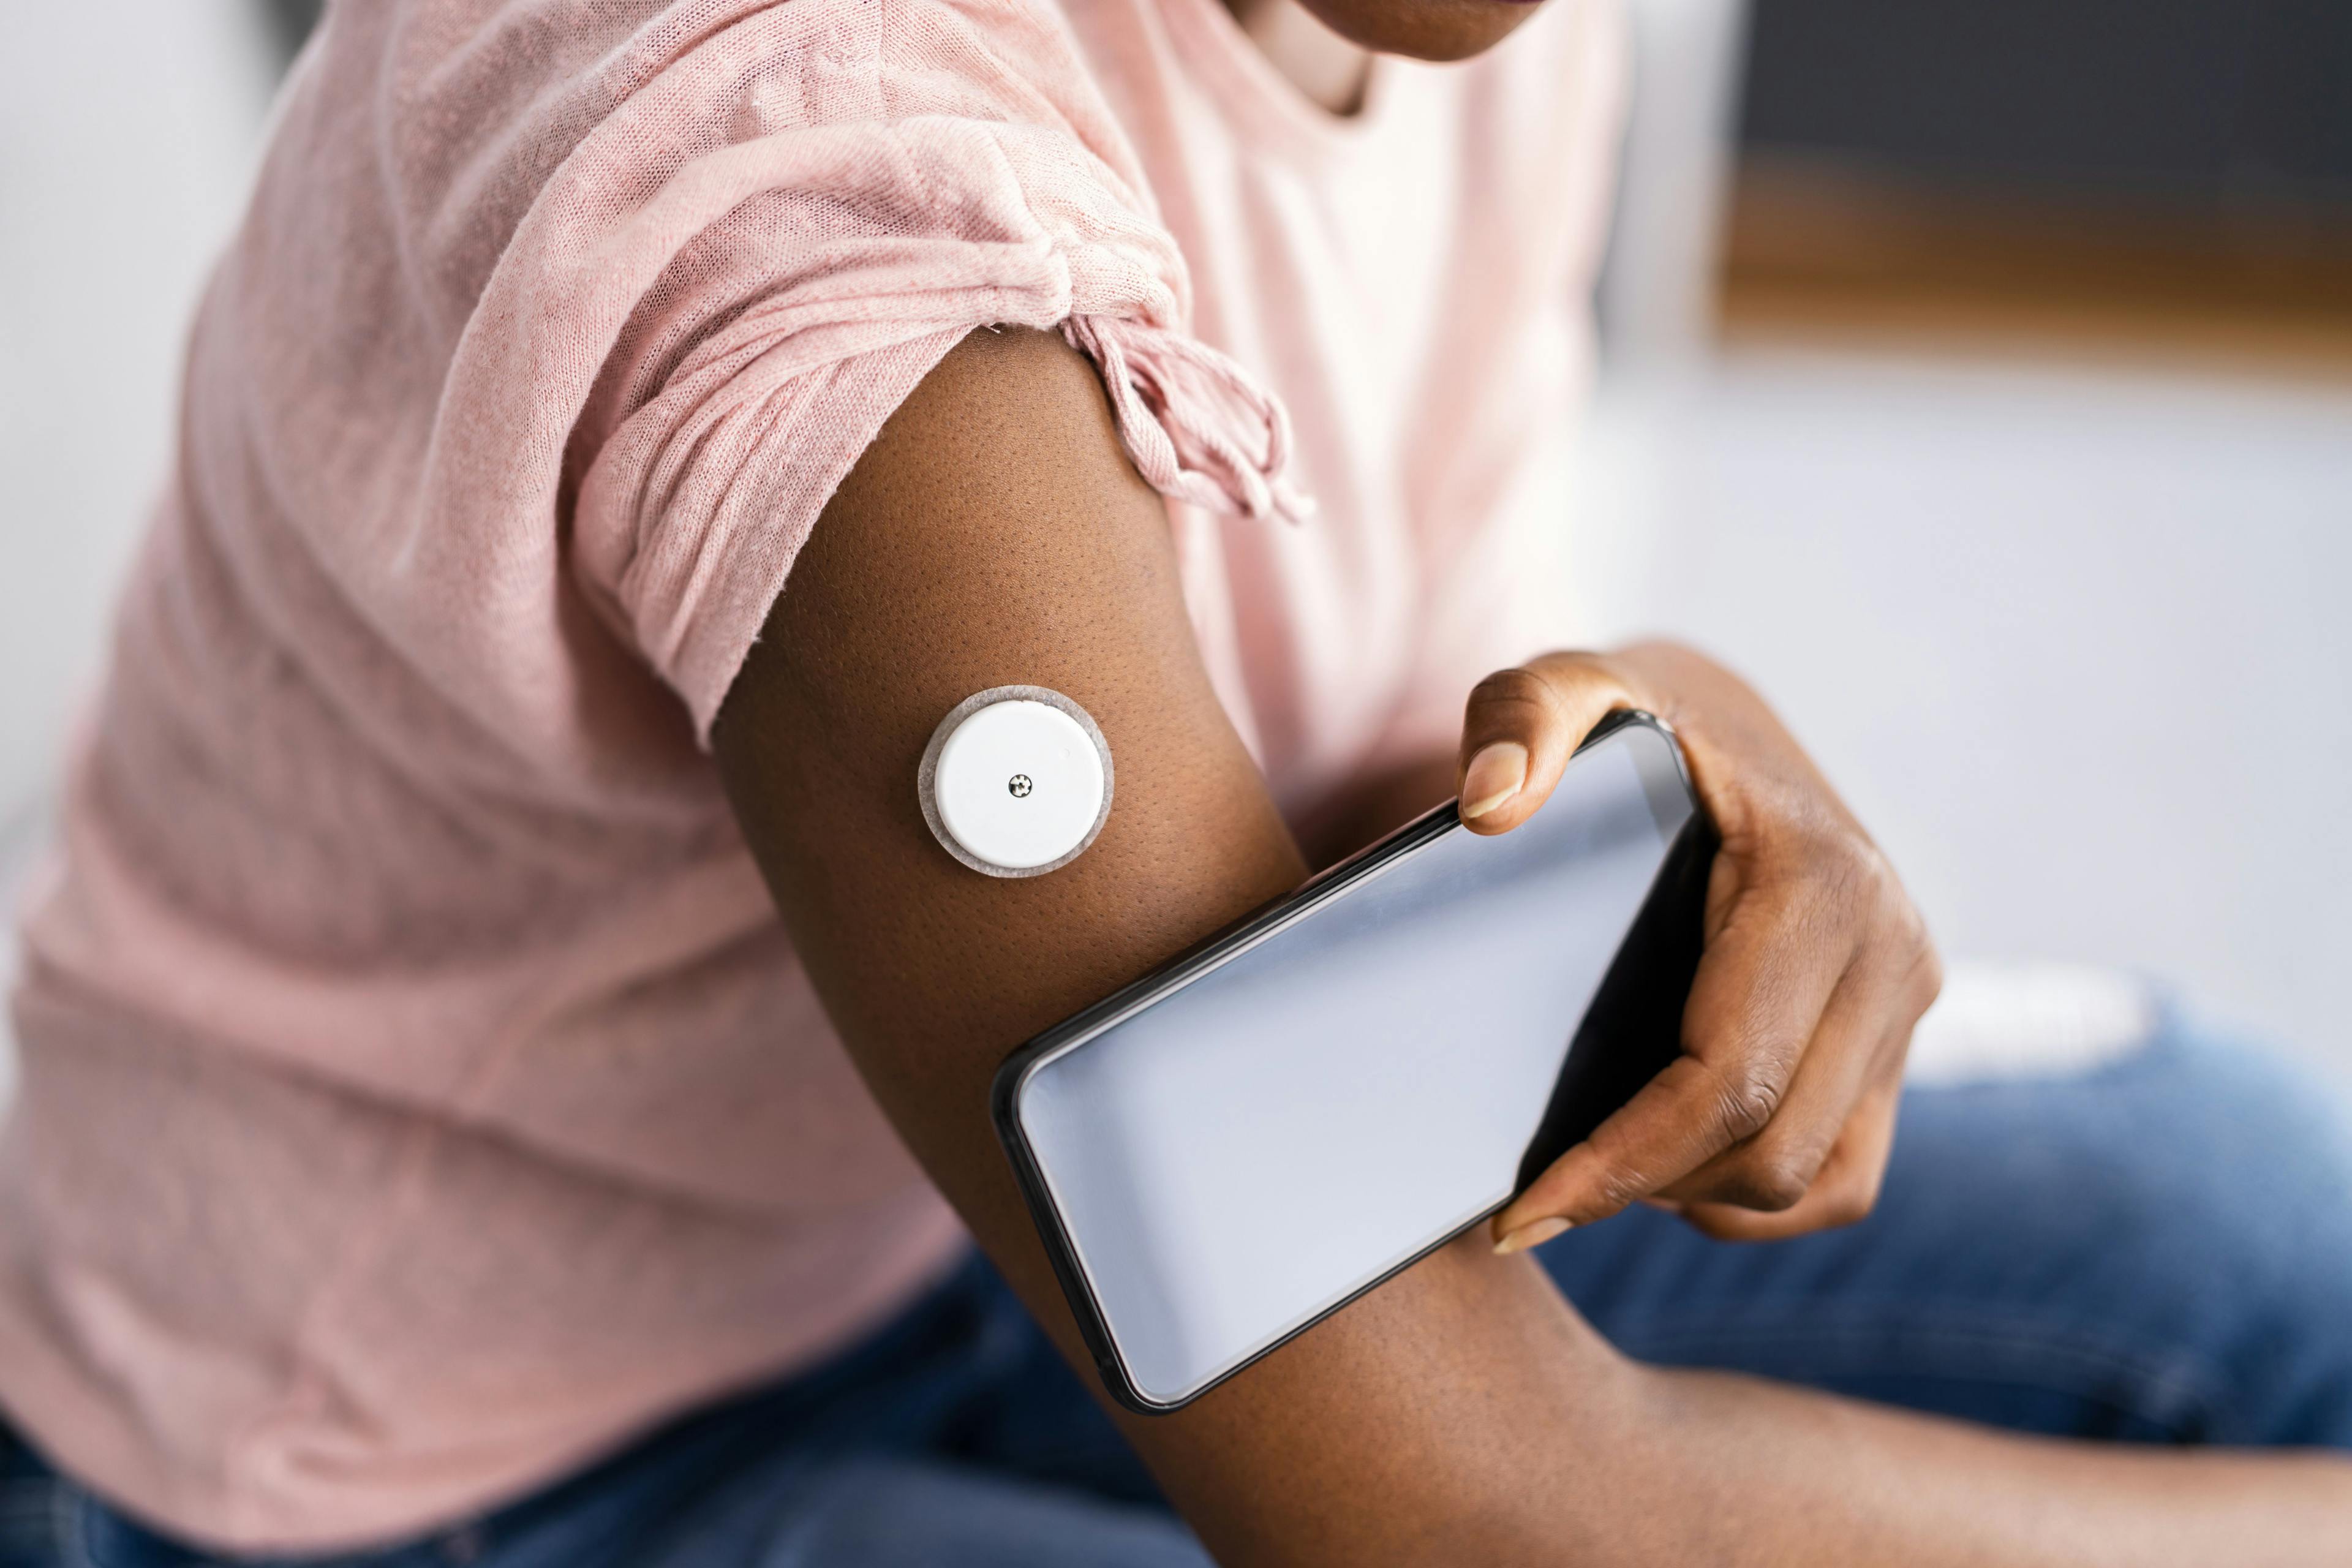 Intermittently Scanned CGM Can Reduce Hypoglycemic Episodes in T1D